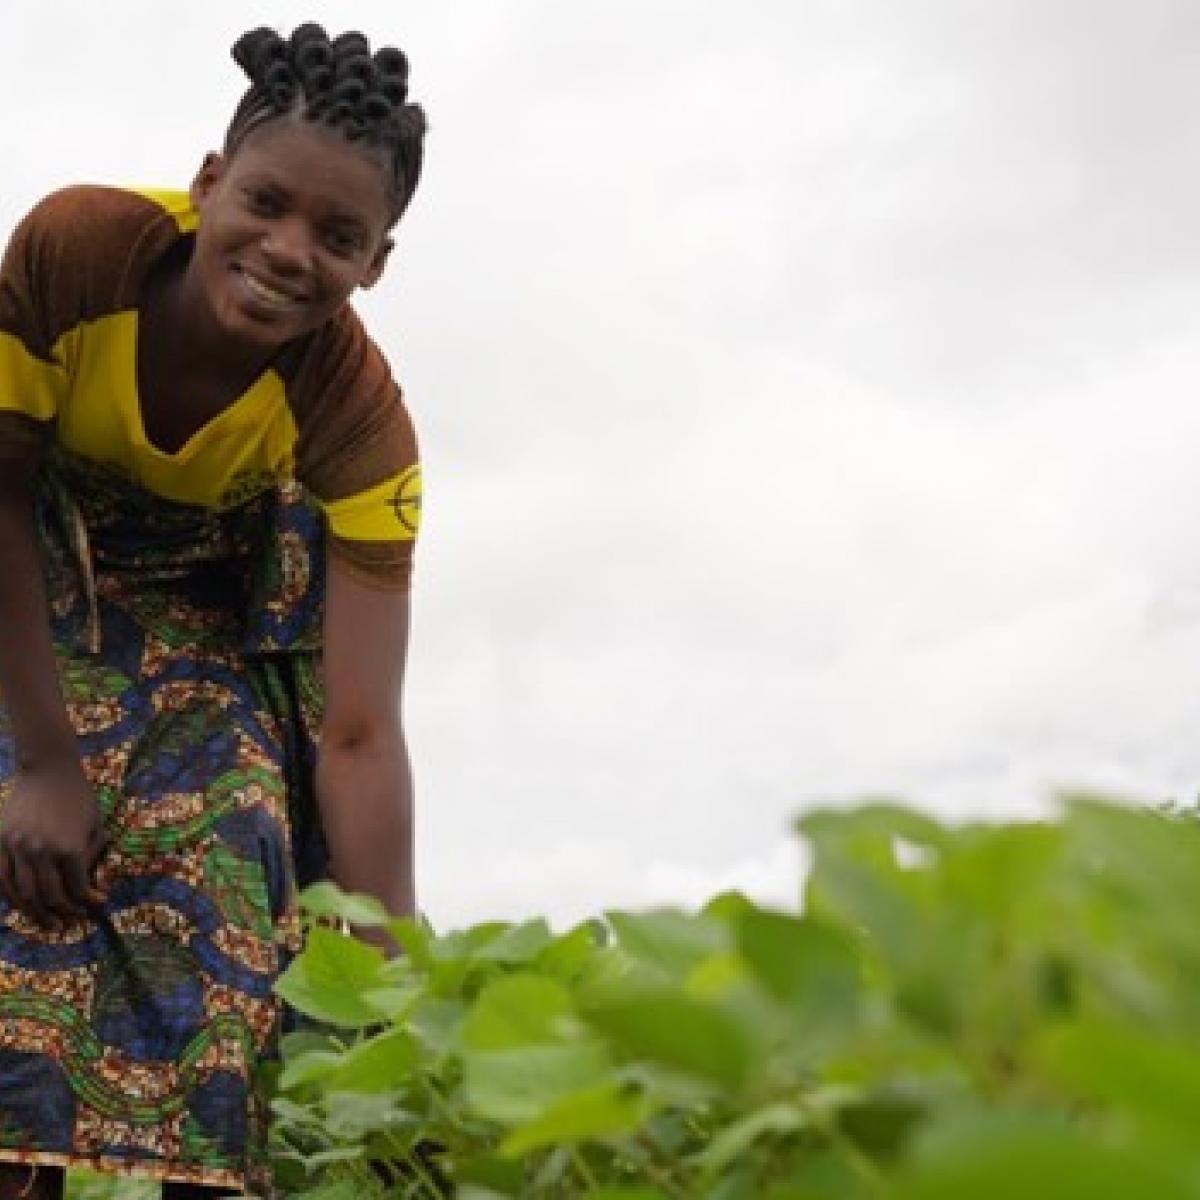 A young women smiles while kneeling down to display a field of green soybean plants